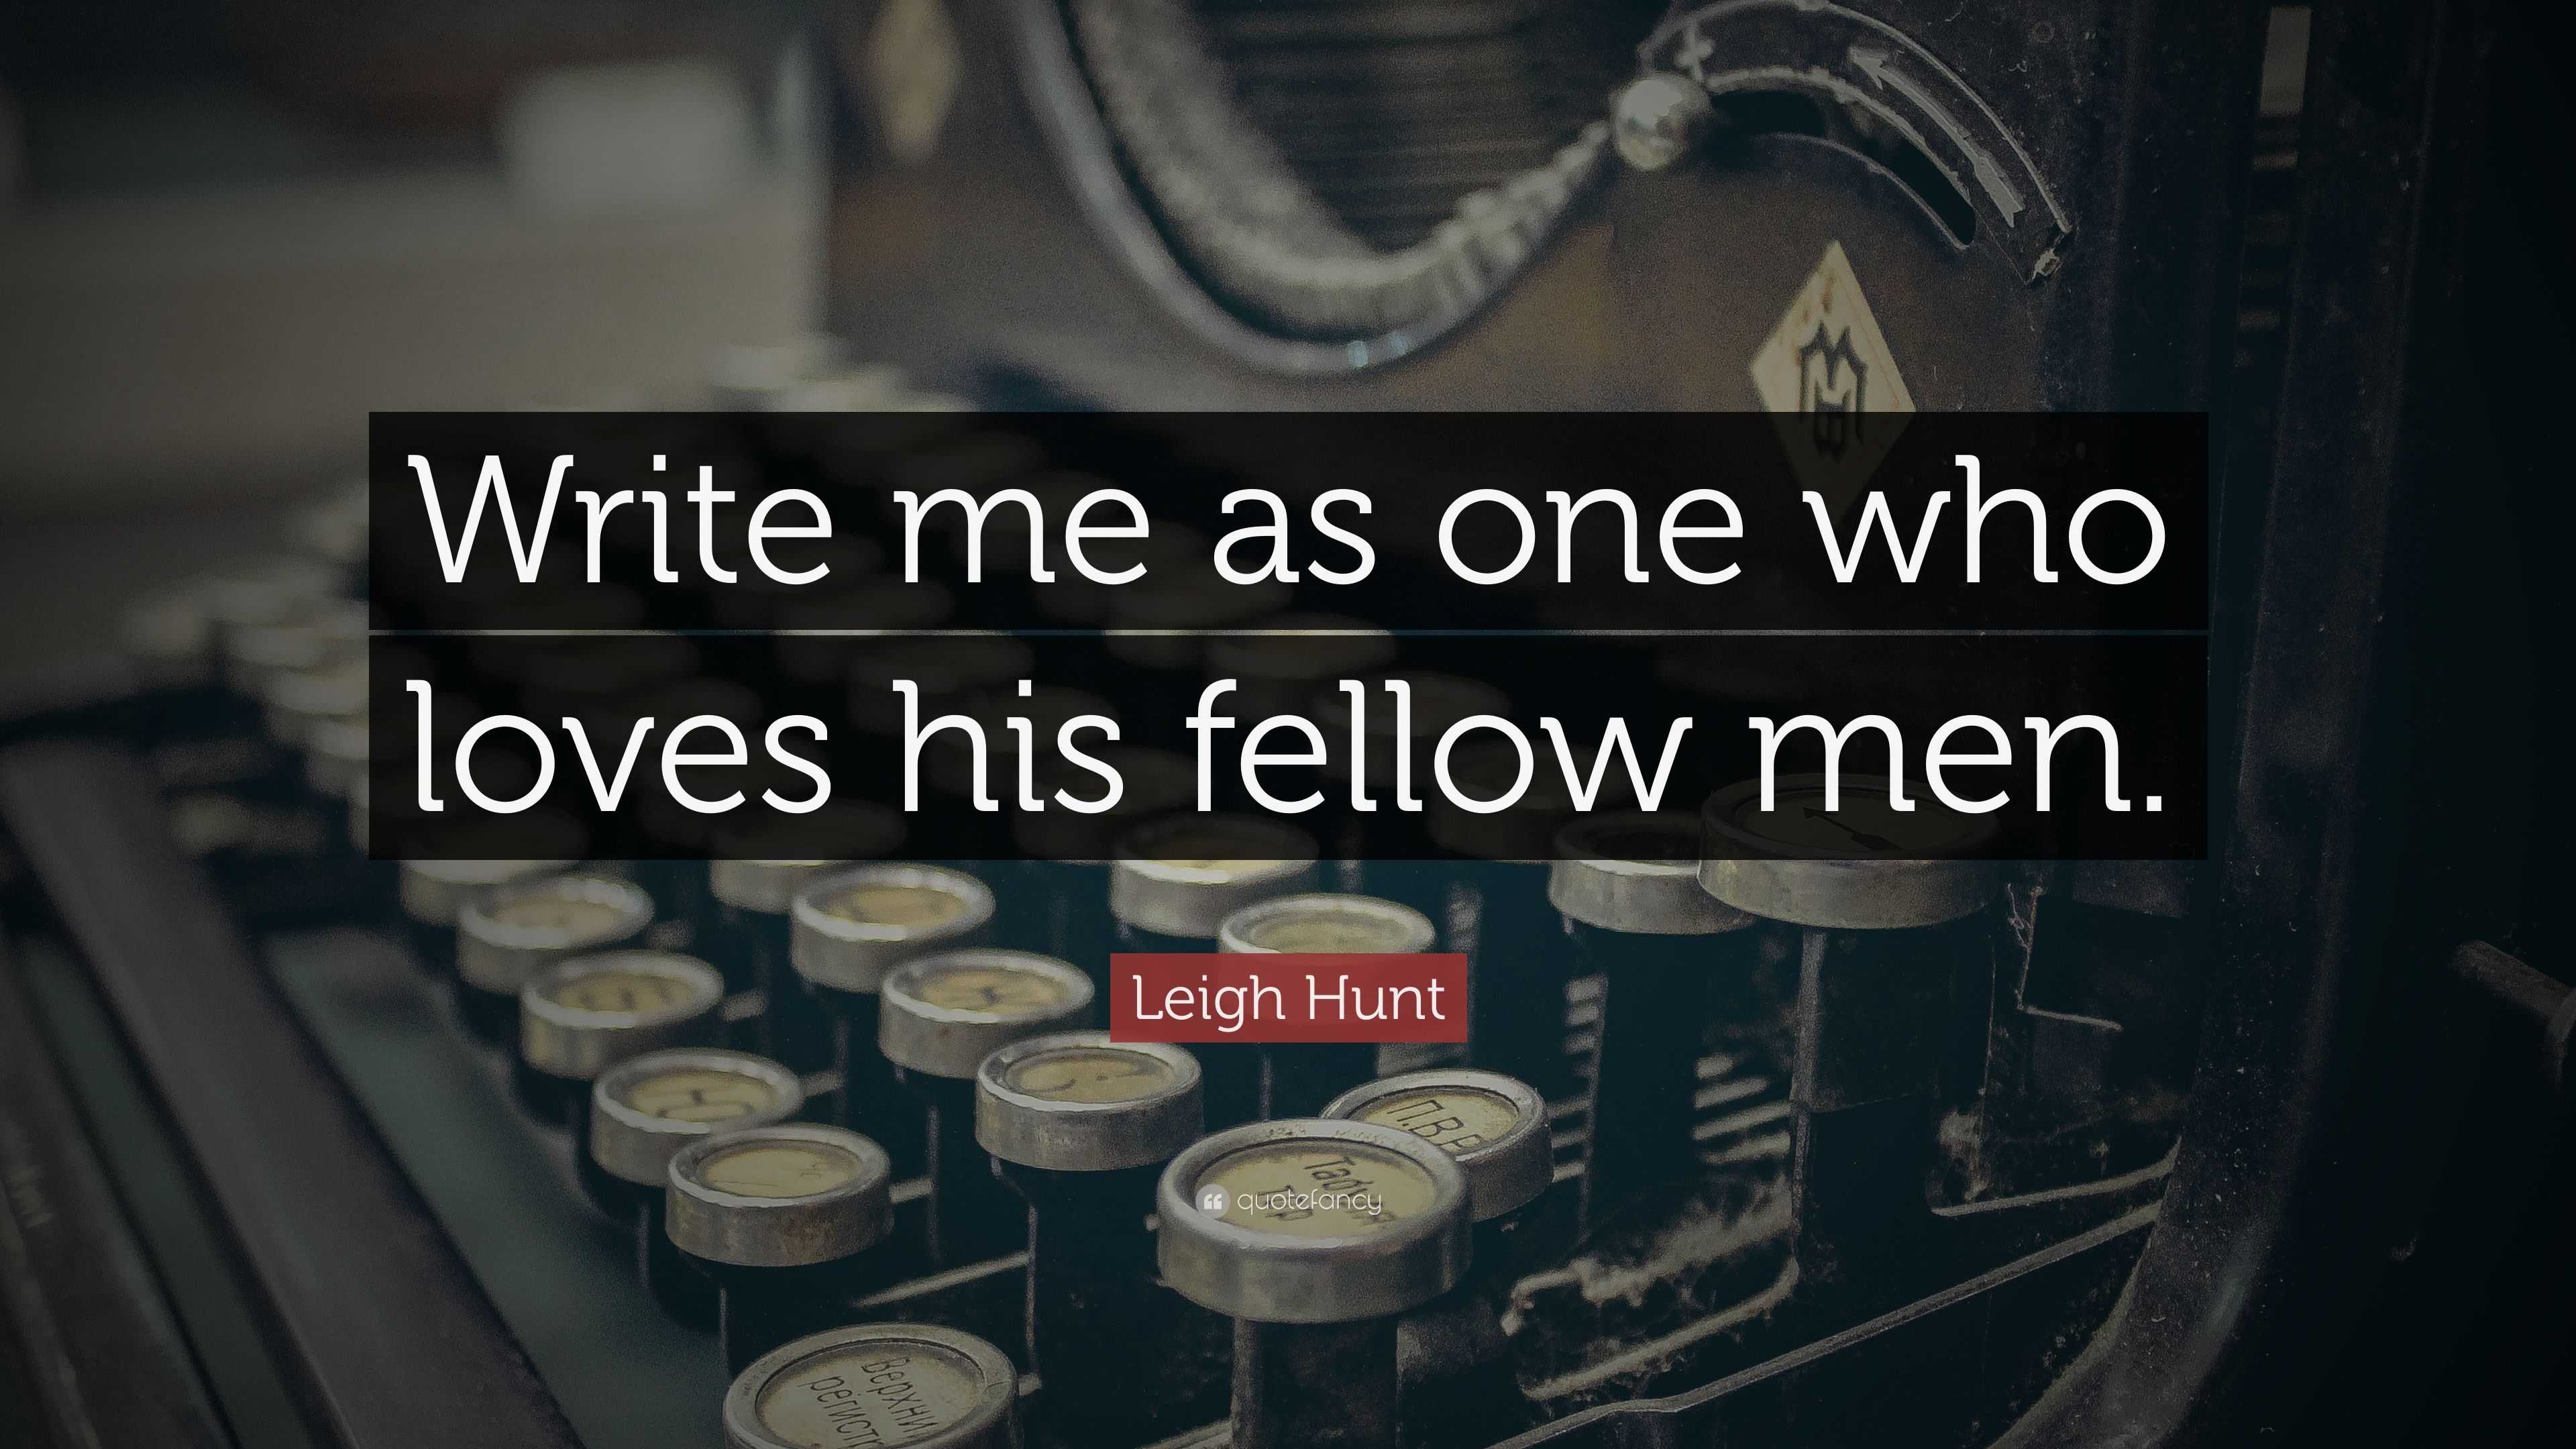 Leigh Hunt Quote “write Me As One Who Loves His Fellow Men ”